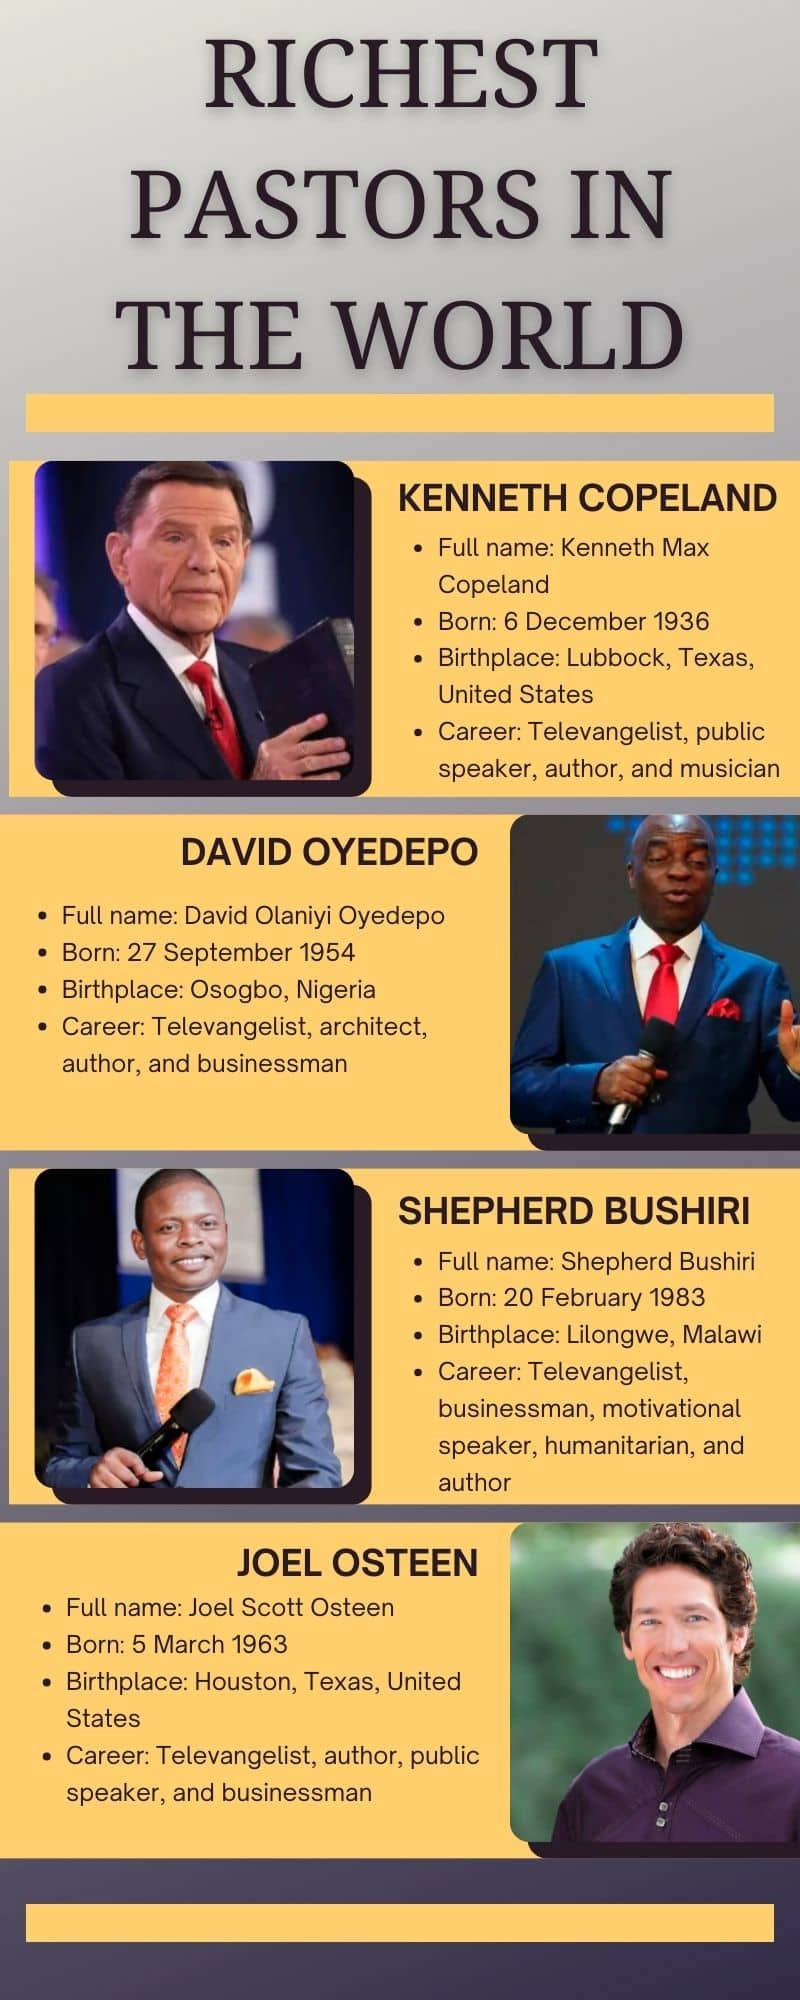 Richest pastors in the world